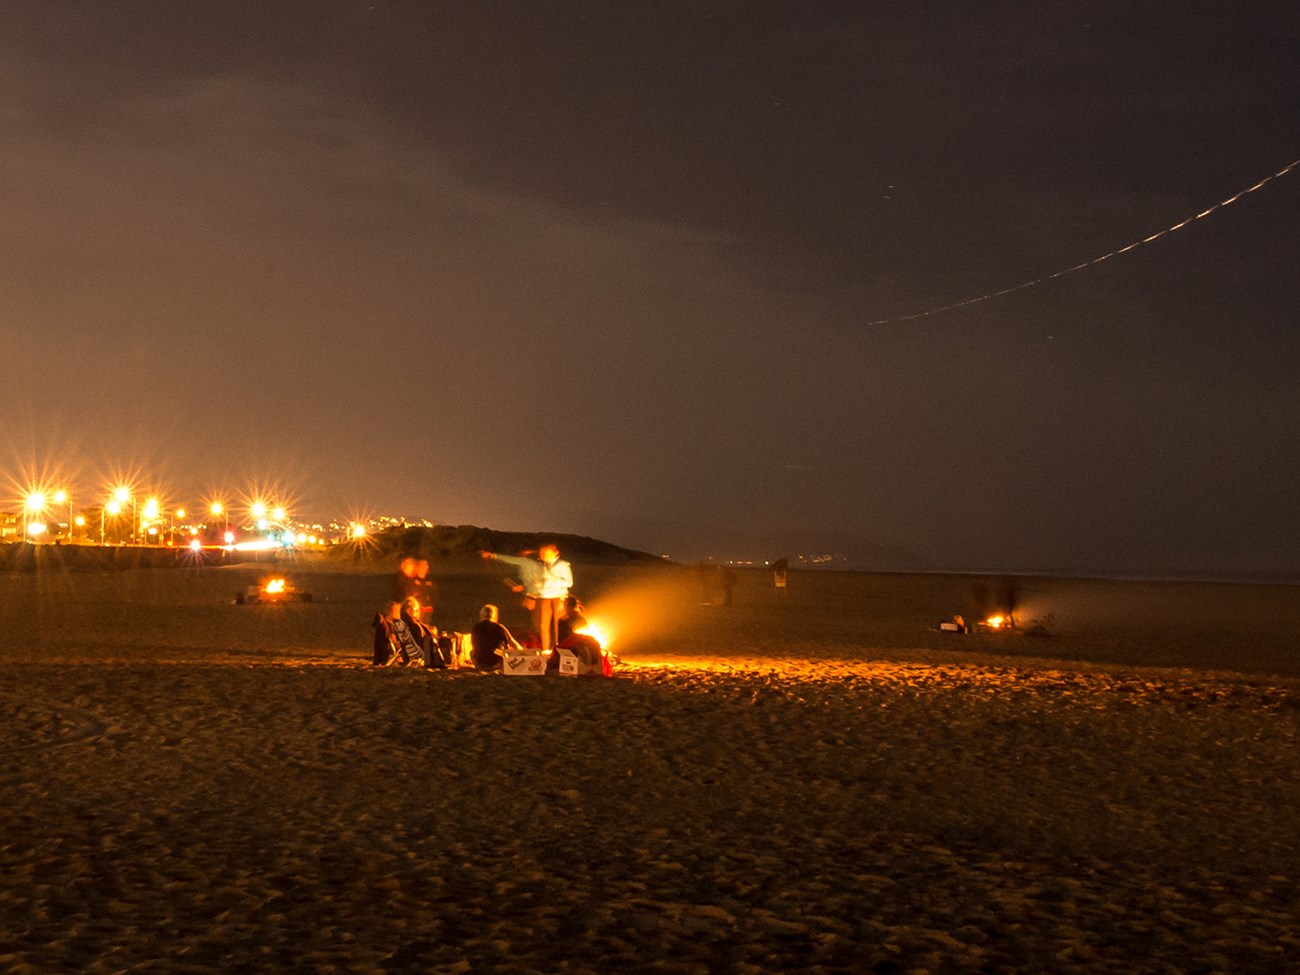 Night time at Ocean Beach with scattered beach fires on sand